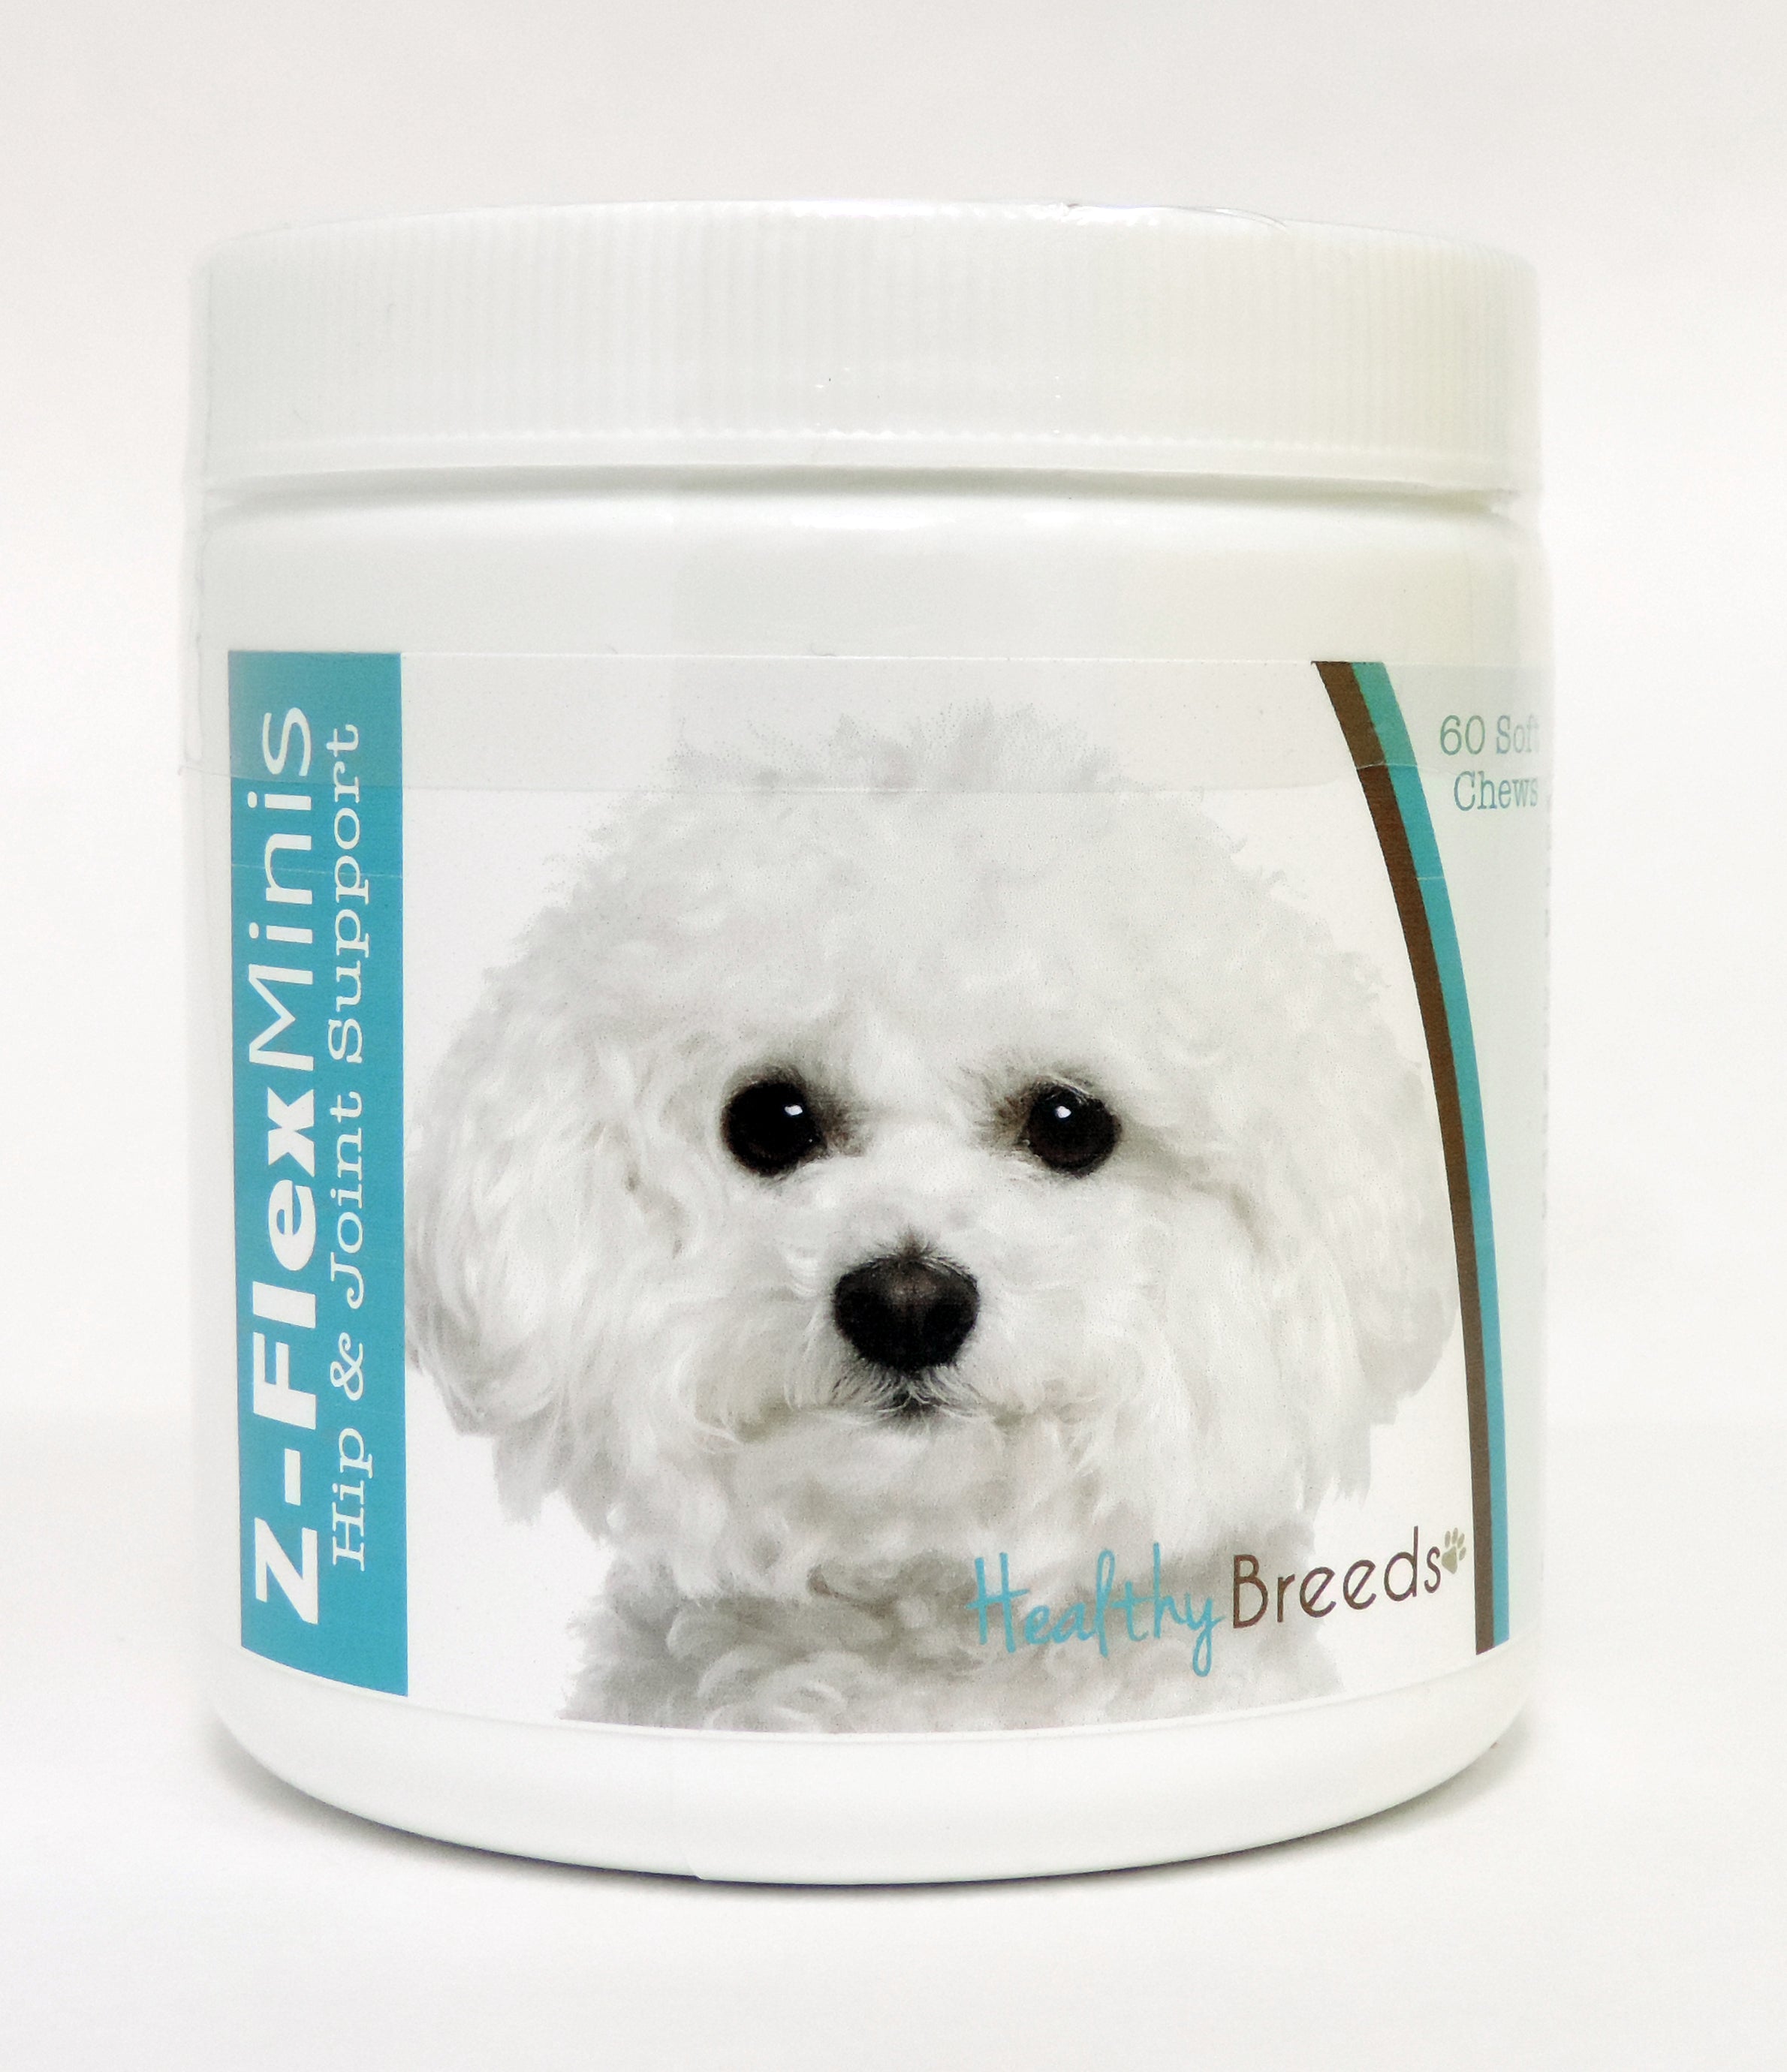 Bichon Frise Z-Flex Minis Hip and Joint Support Soft Chews 60 Count